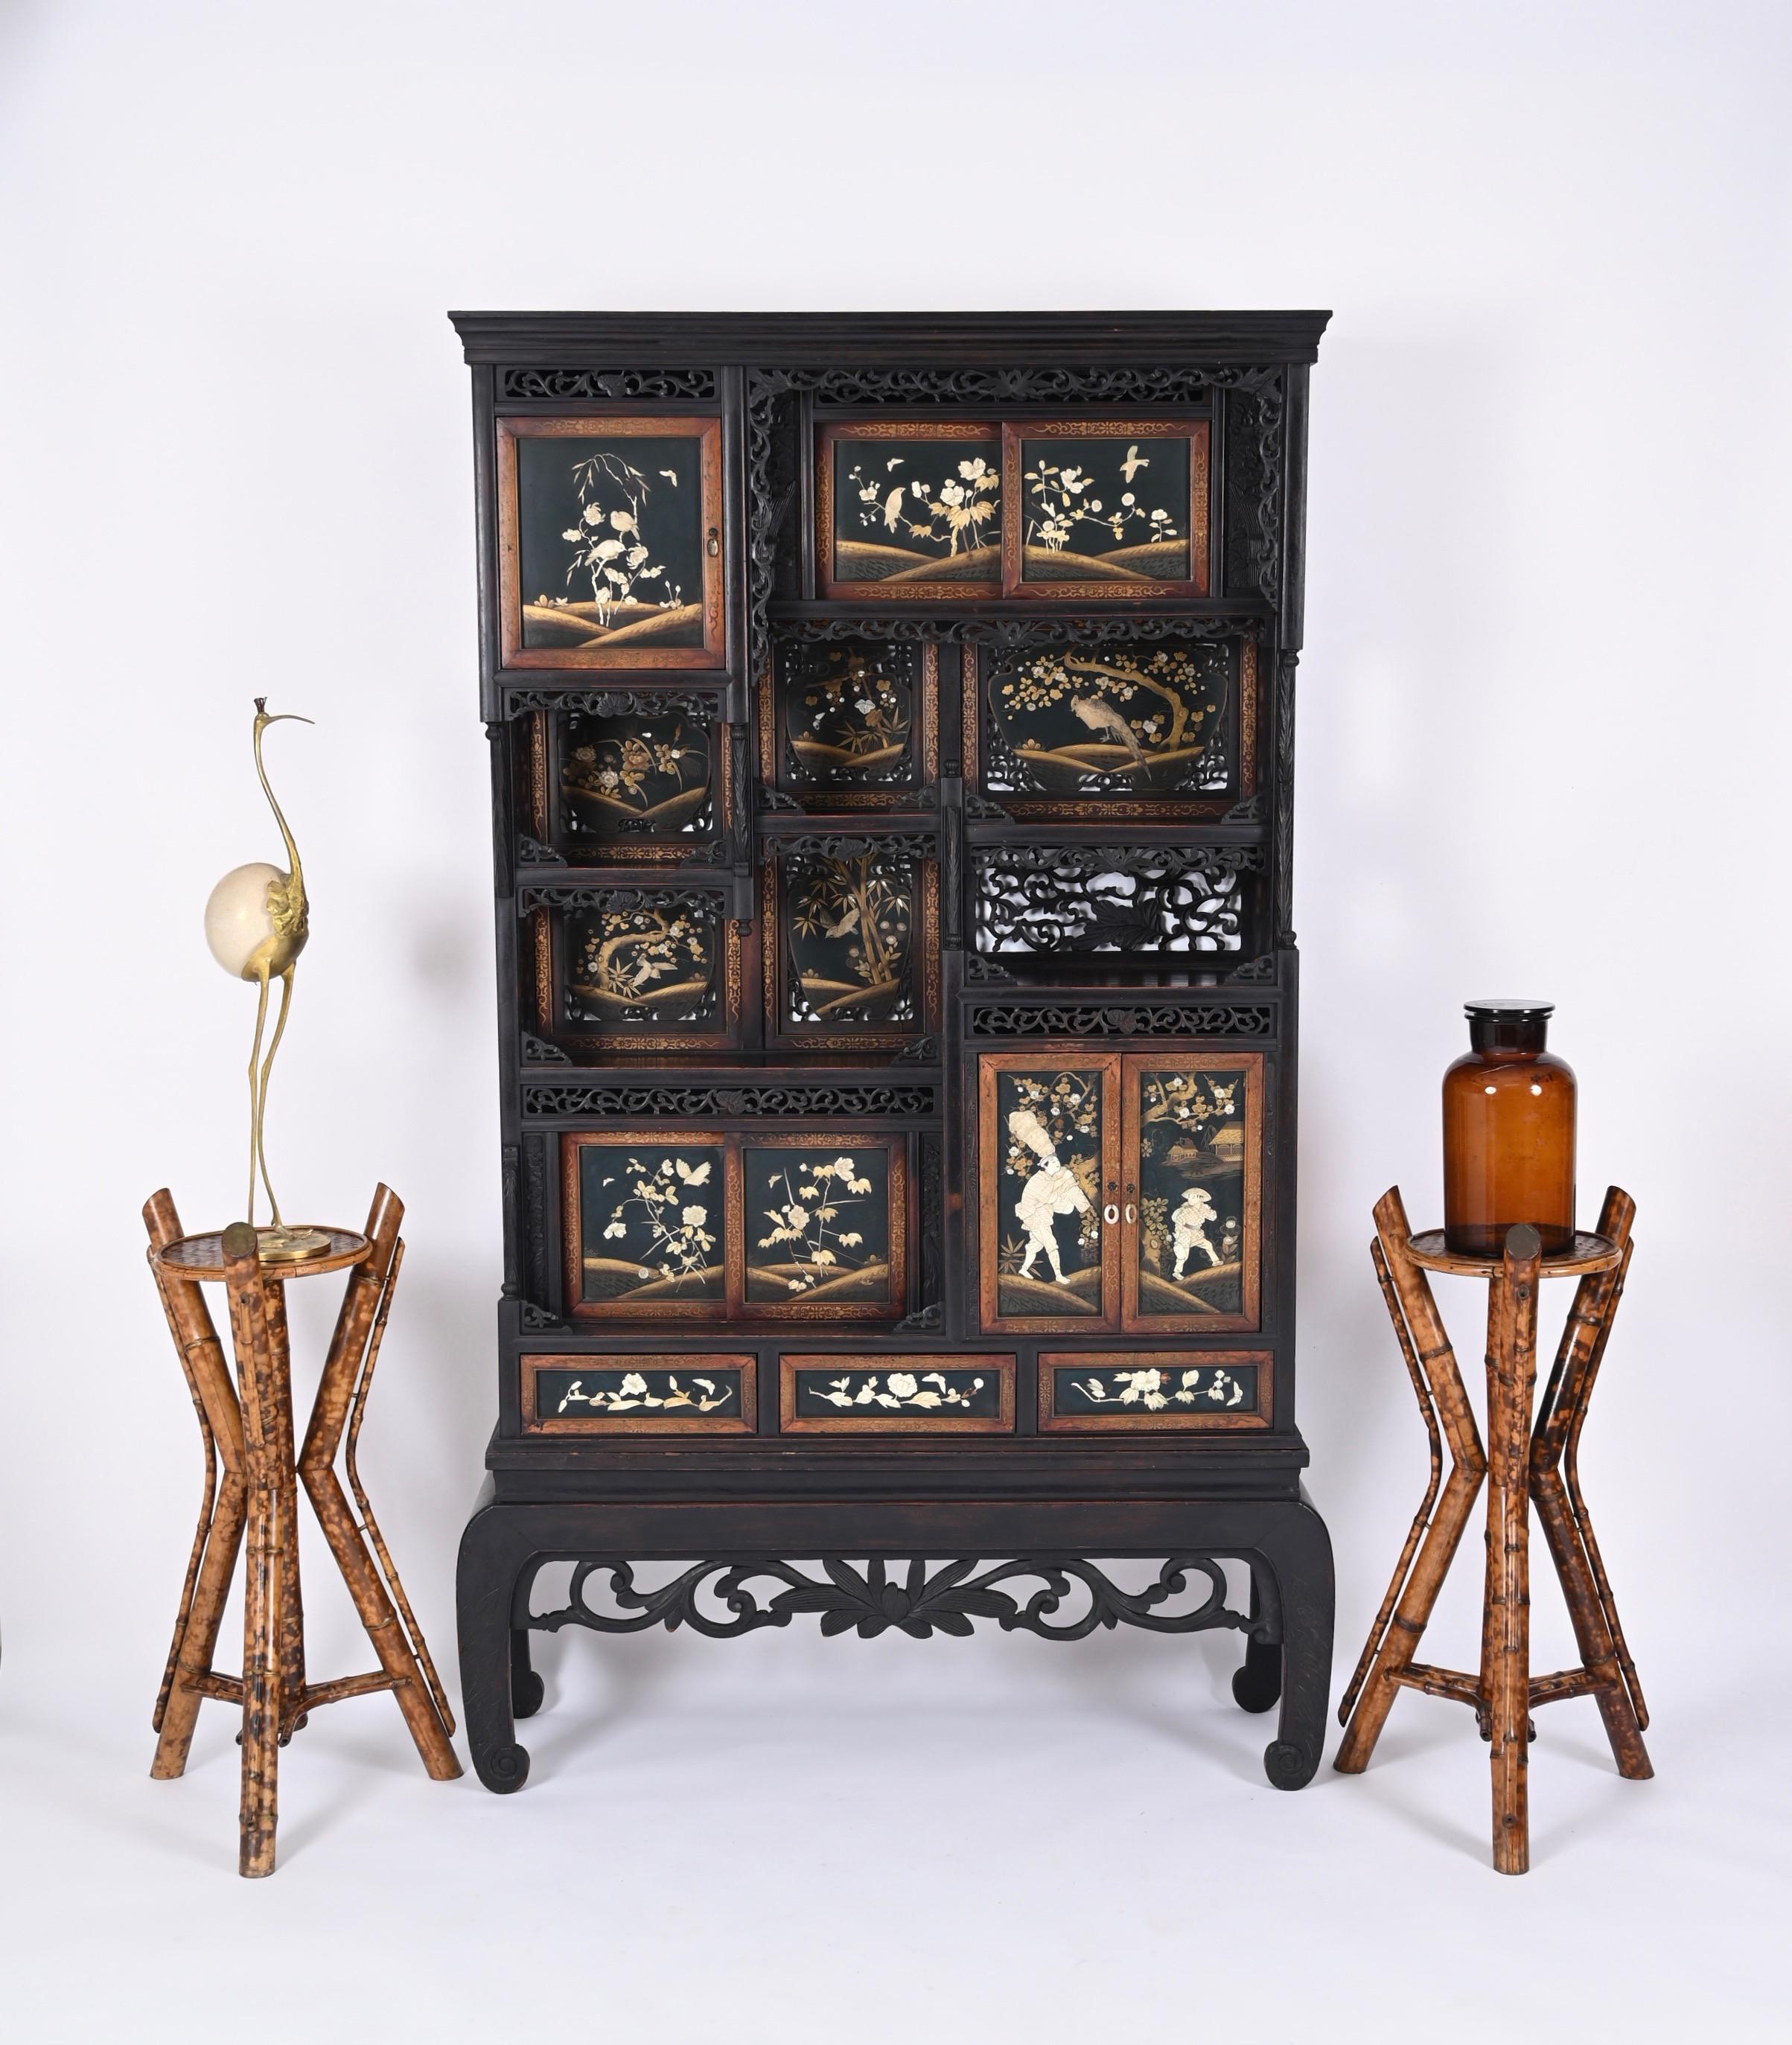 Outstanding Shibayama cabinet from the Meiji period in black lacquered and hand-carved wood with marvellous arrangement of sliding and hinged doors and drawers decorated with precious materials such as mother pearl and gold. This incredible and